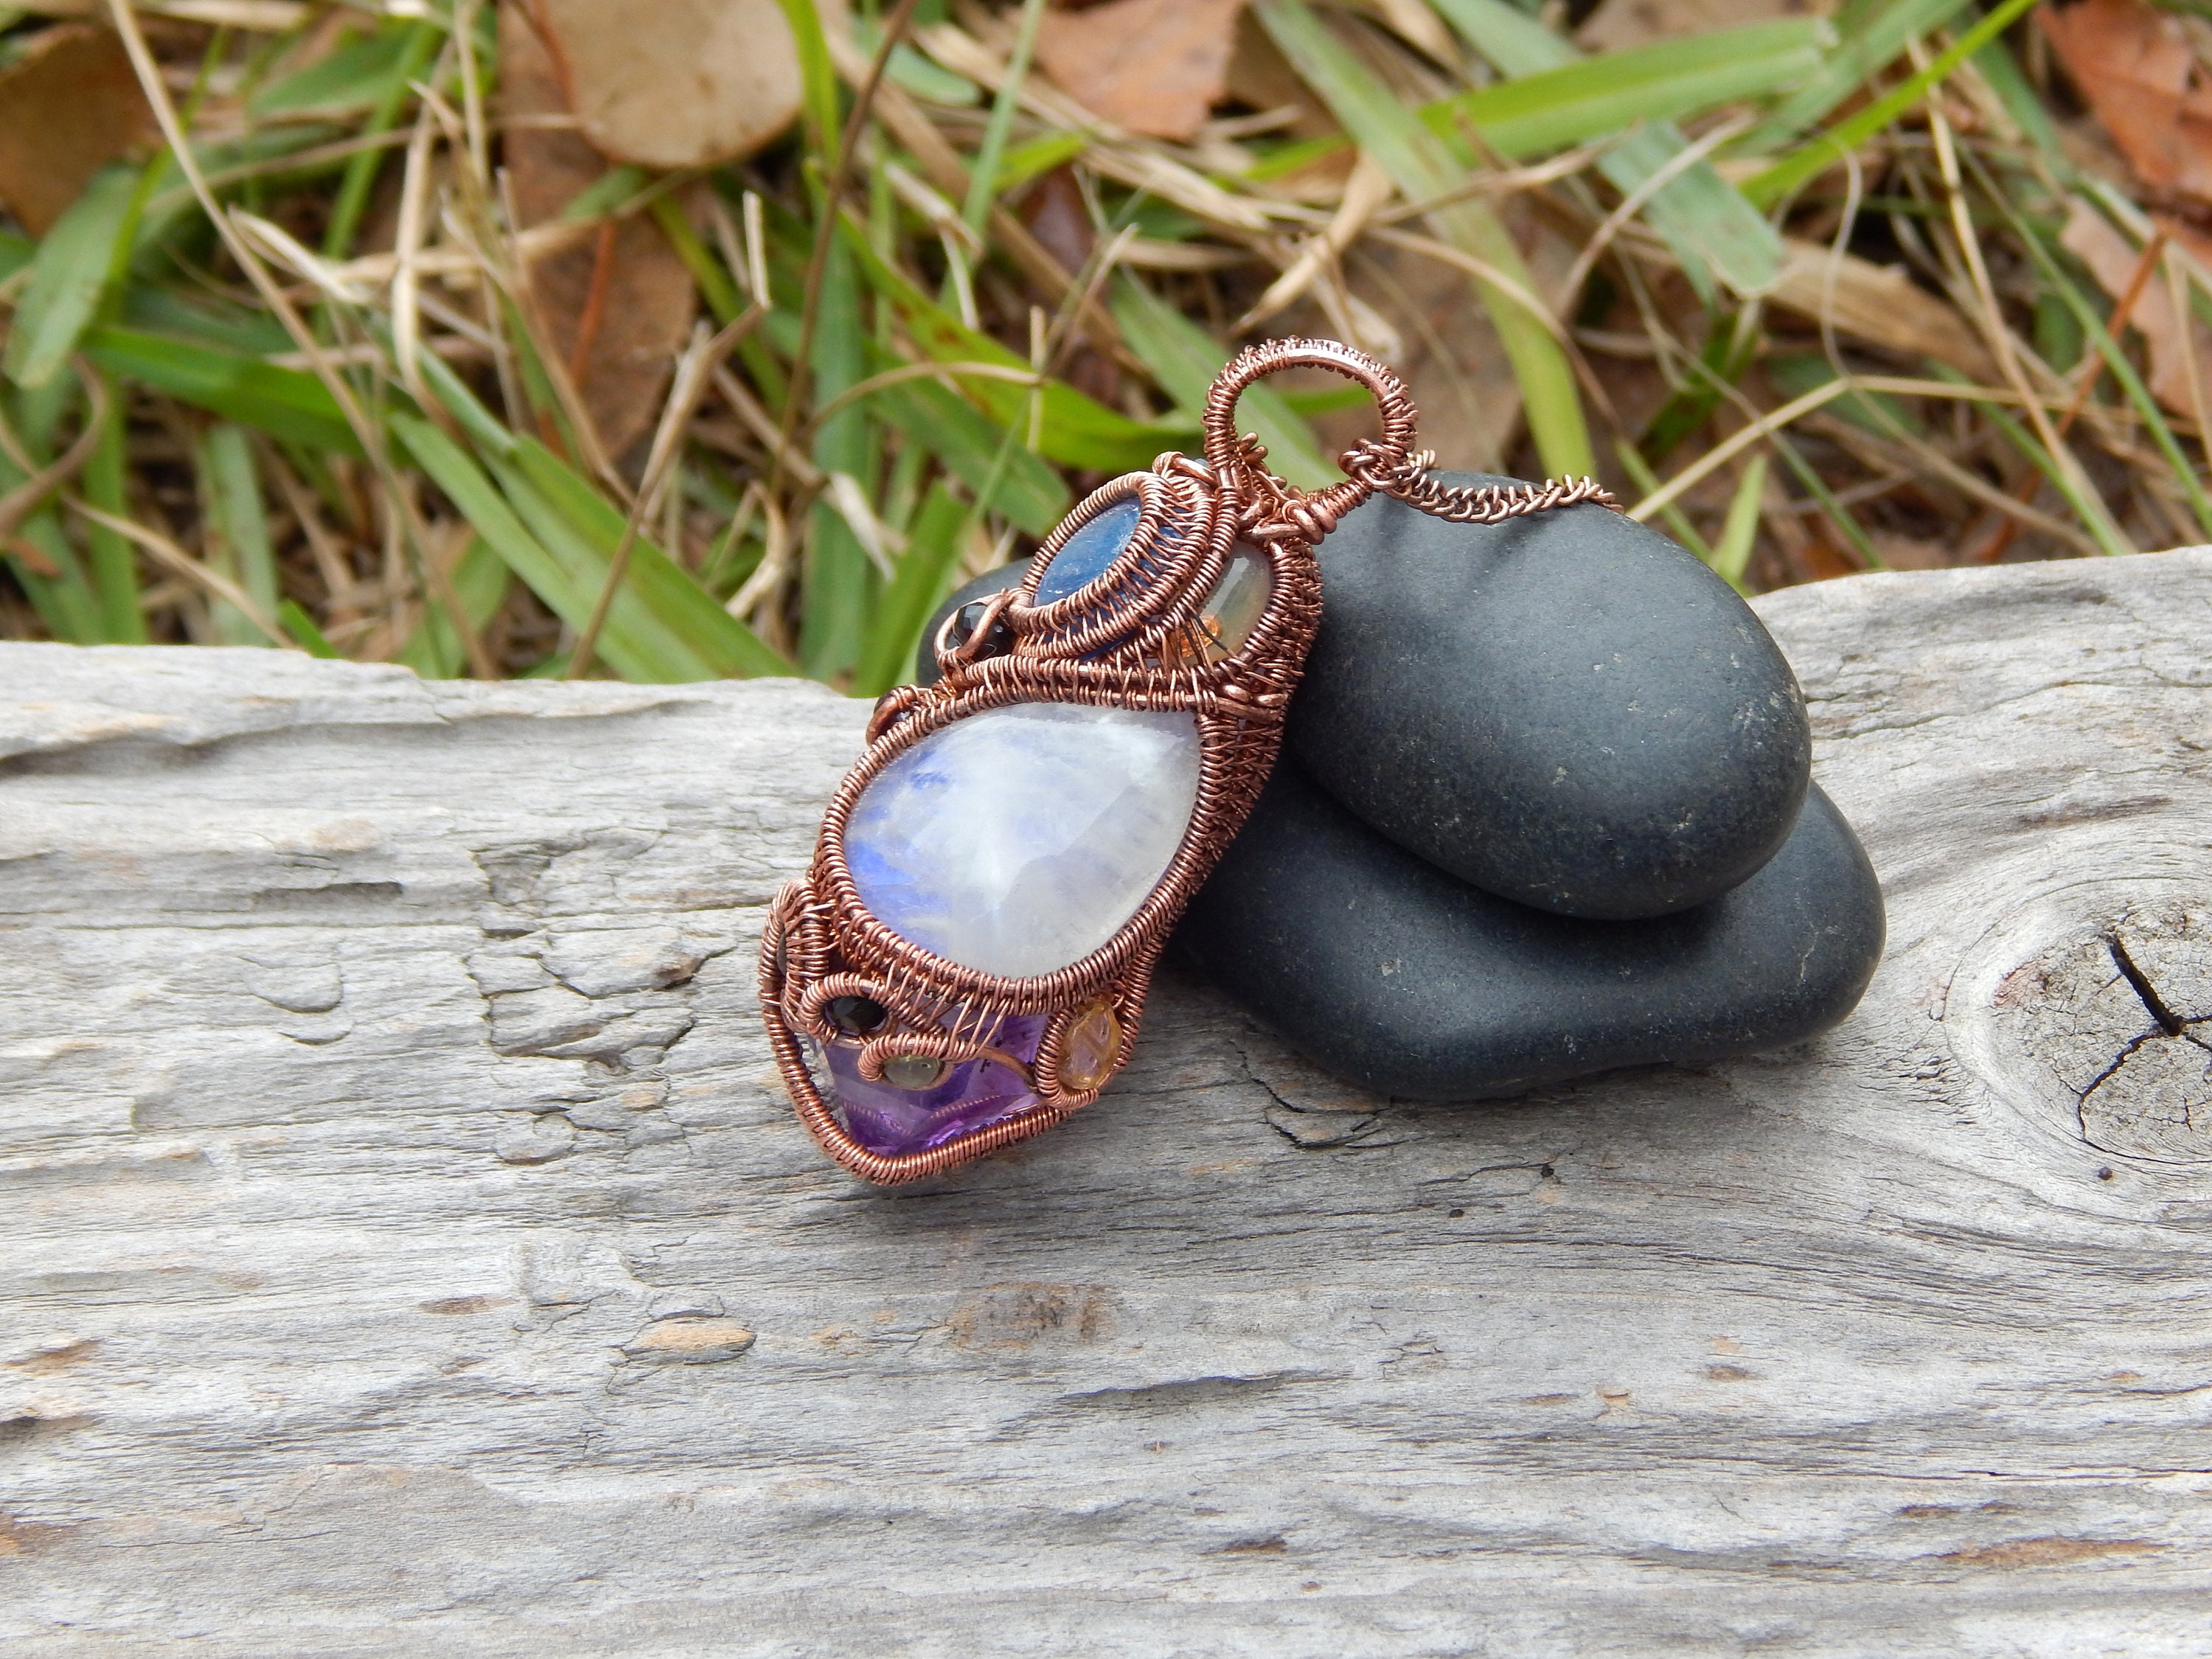 Made this pair today! 💜 Amethyst beads wire wrapped on to hammered &  antiqued Copper charms with my handmade ear wires. : r/jewelrymaking